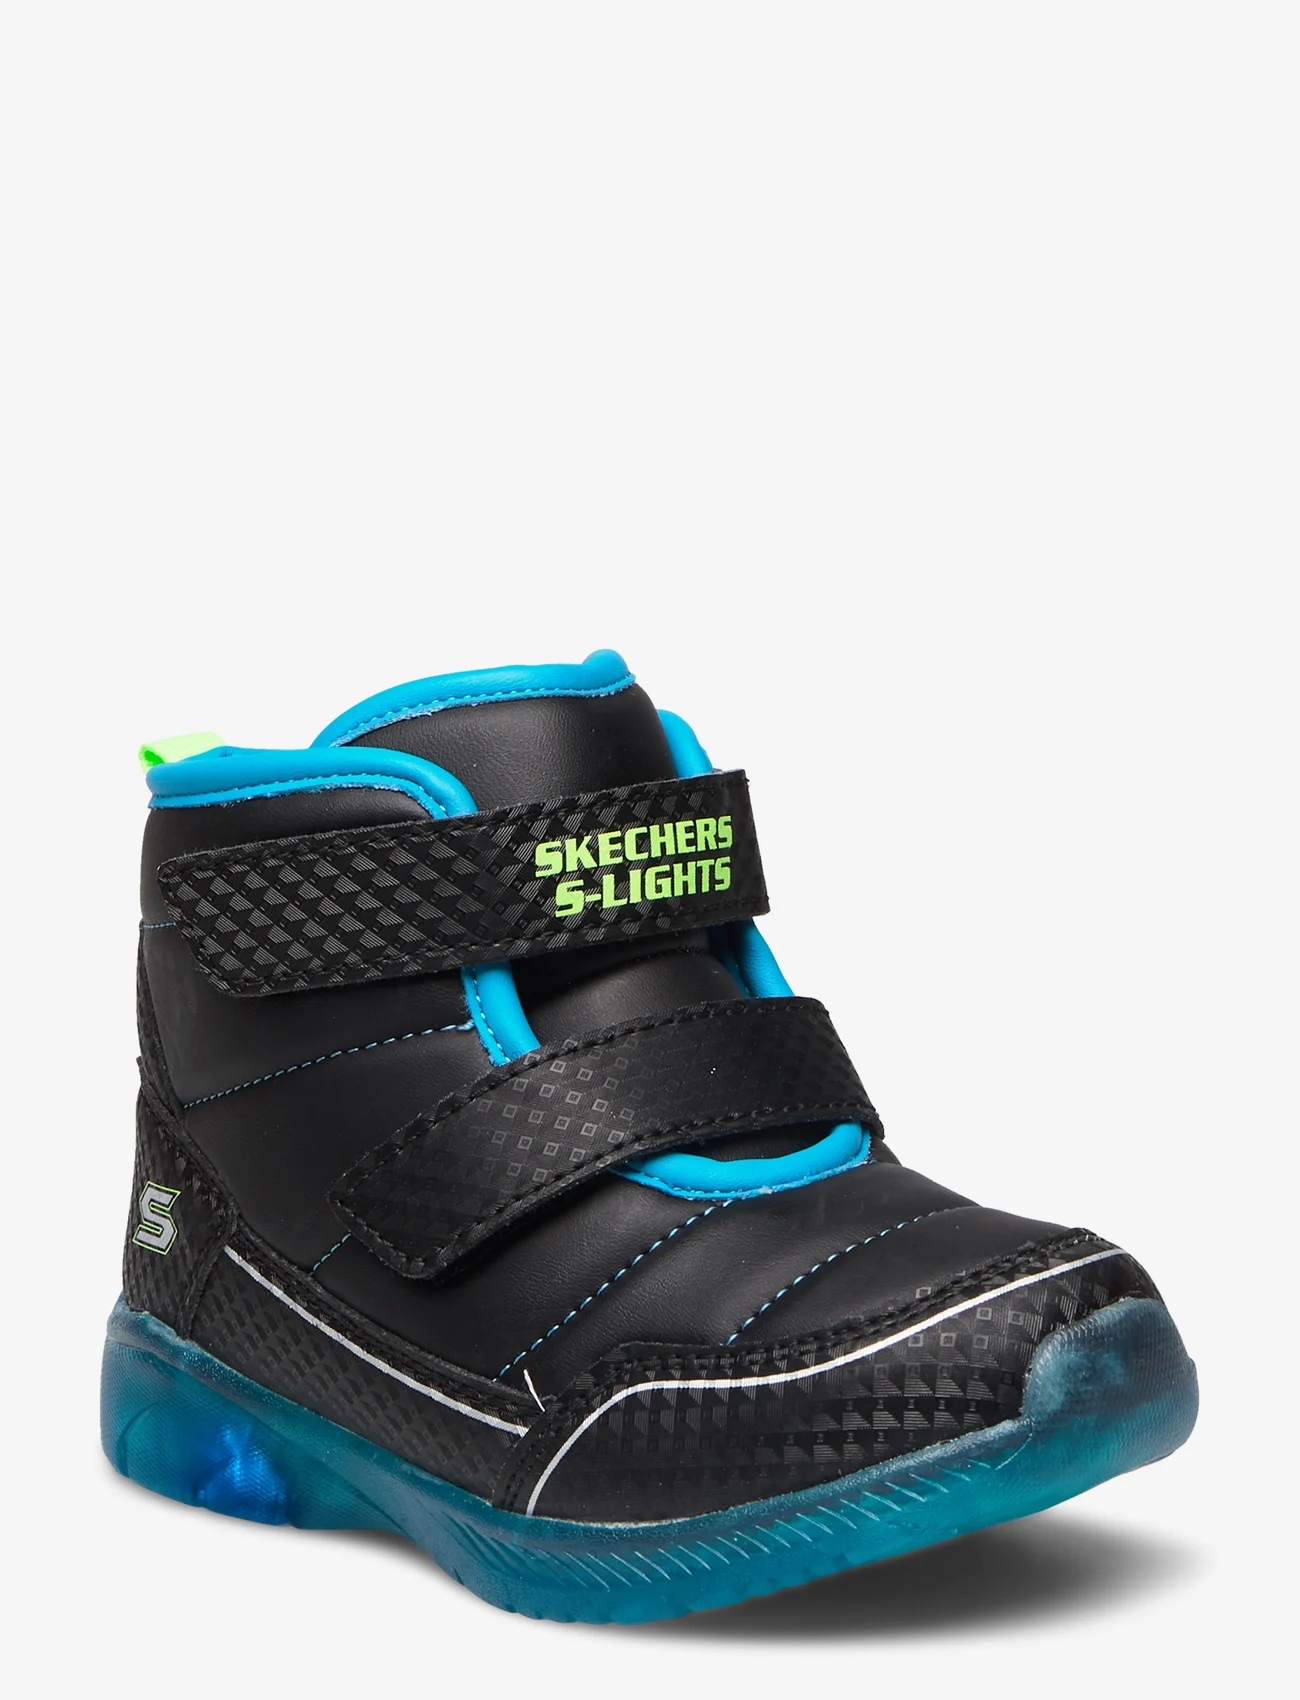 Skechers - Boys Illimi-Brights - Water Repellent - vaikams - bblm black lime - 0